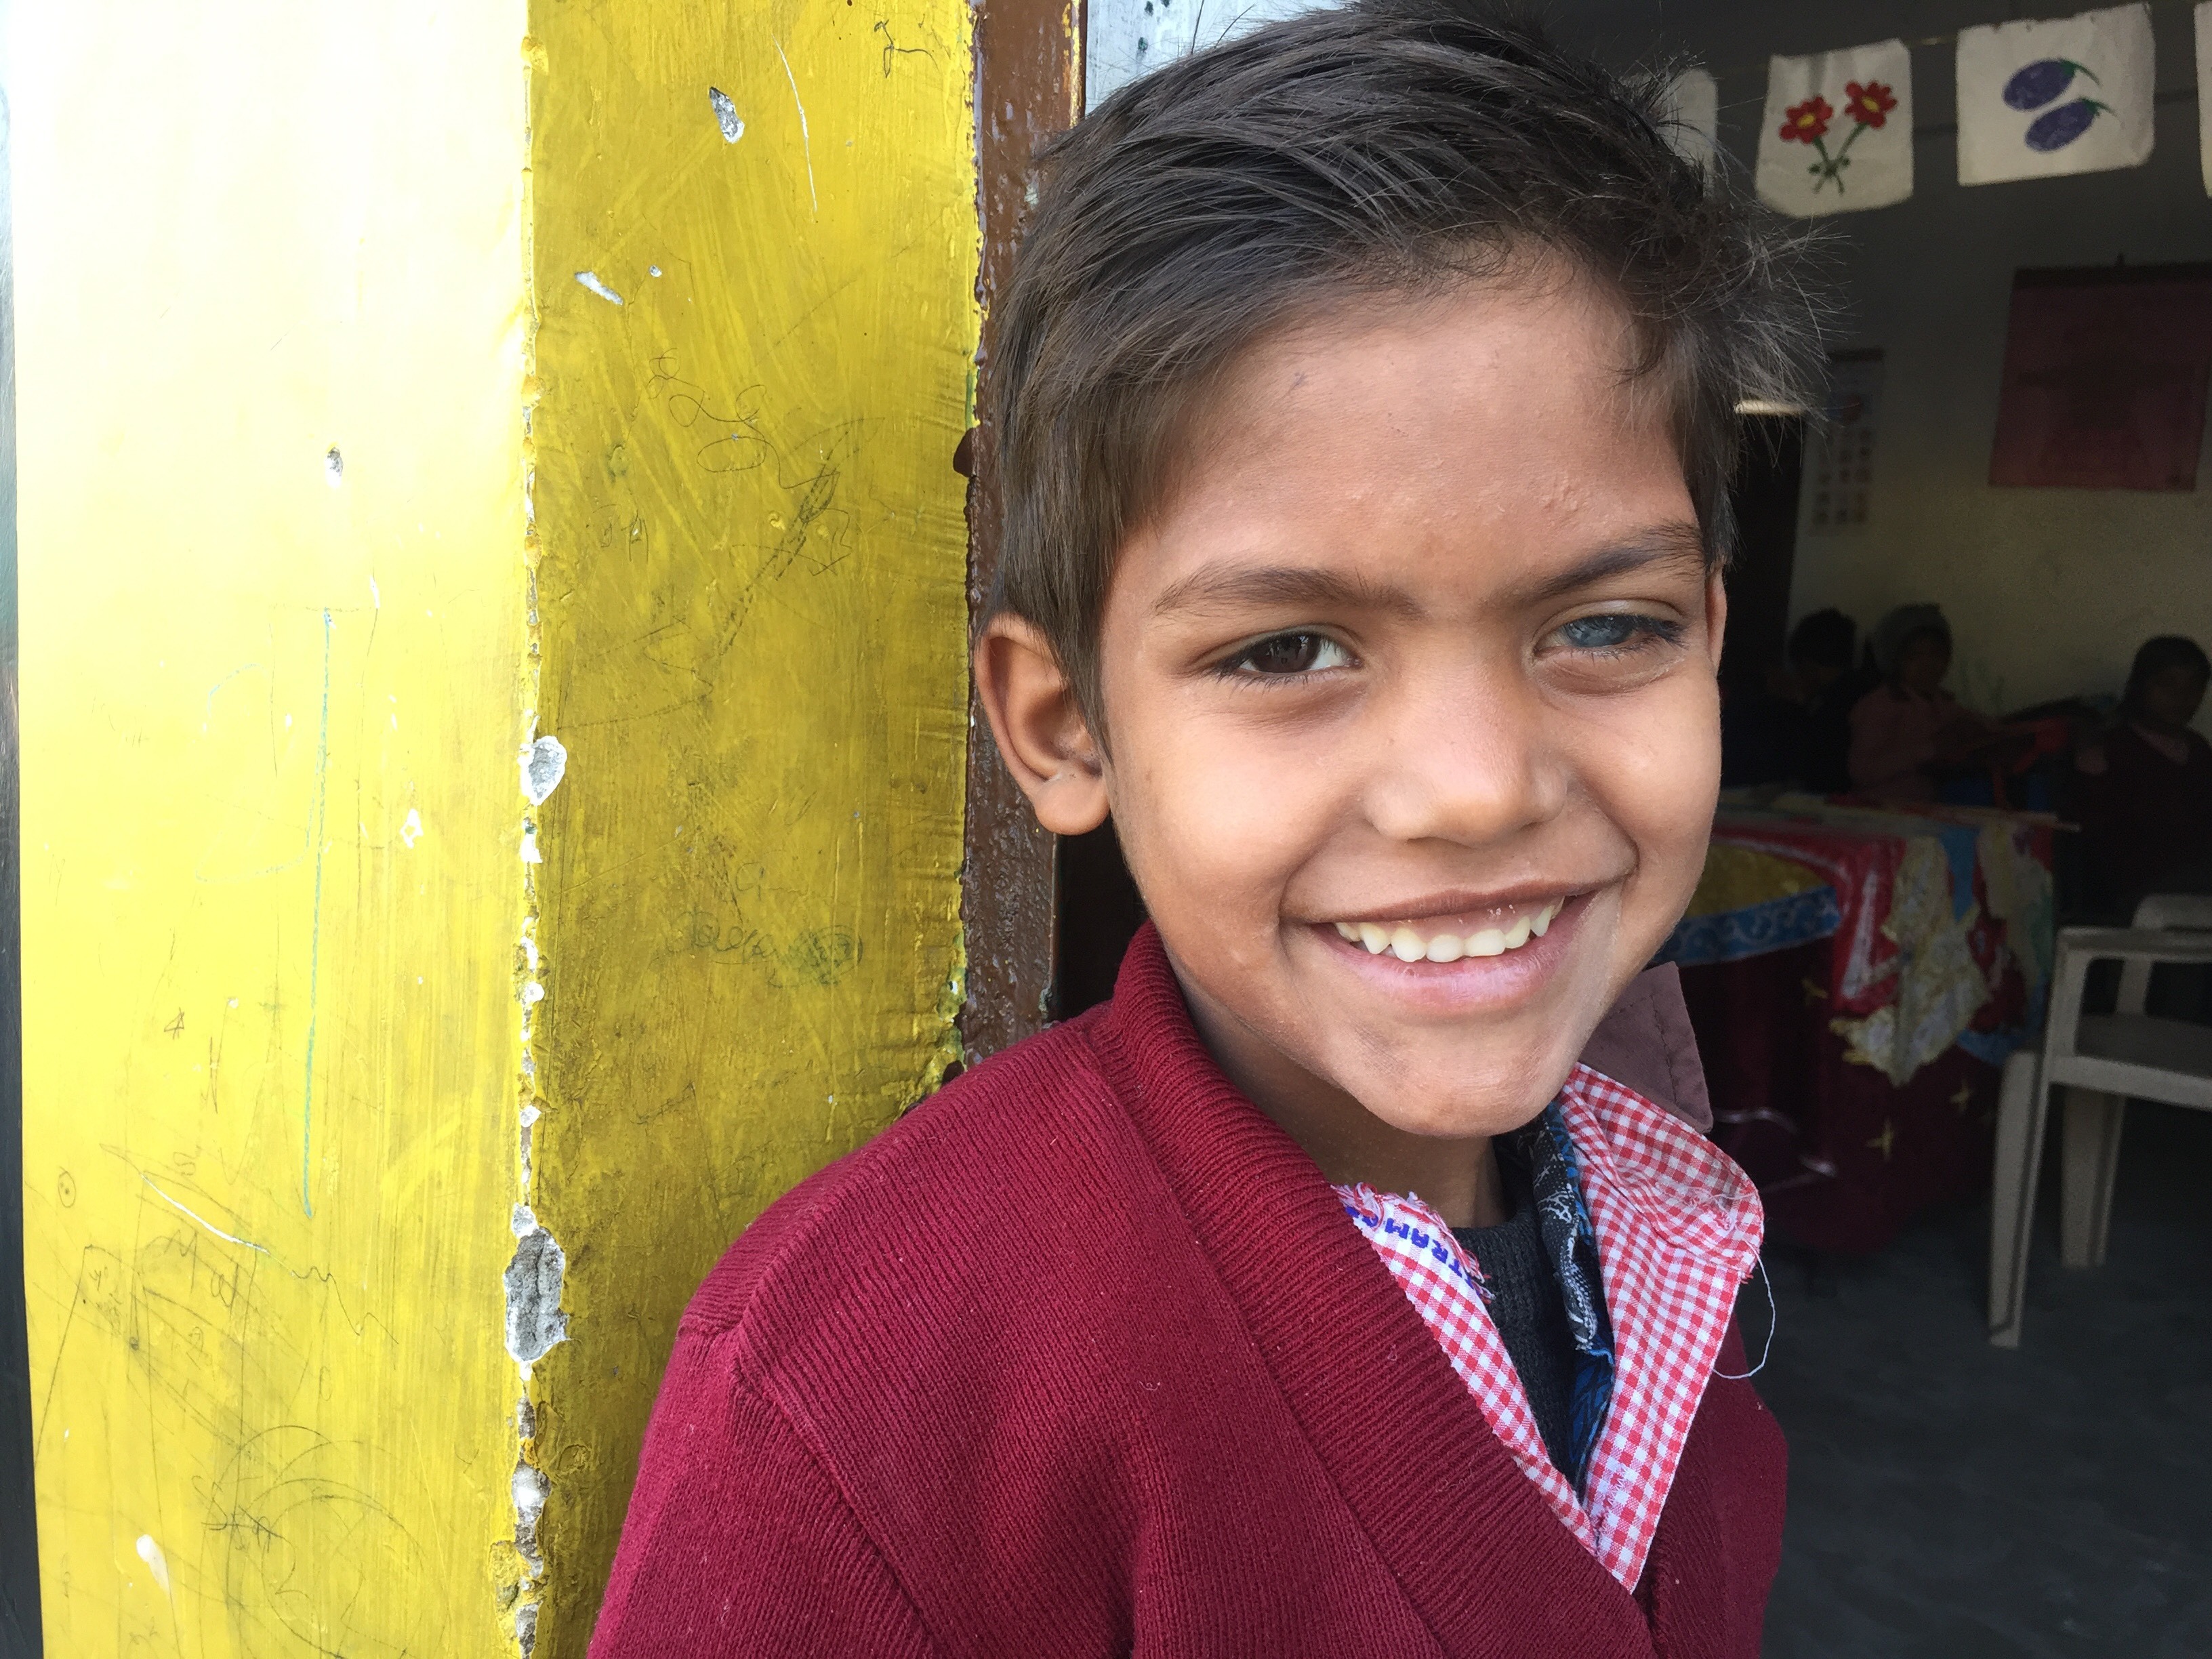 “I like coming to school. Here, I get to meet my friends and have fun with them,” said Ajay, a.